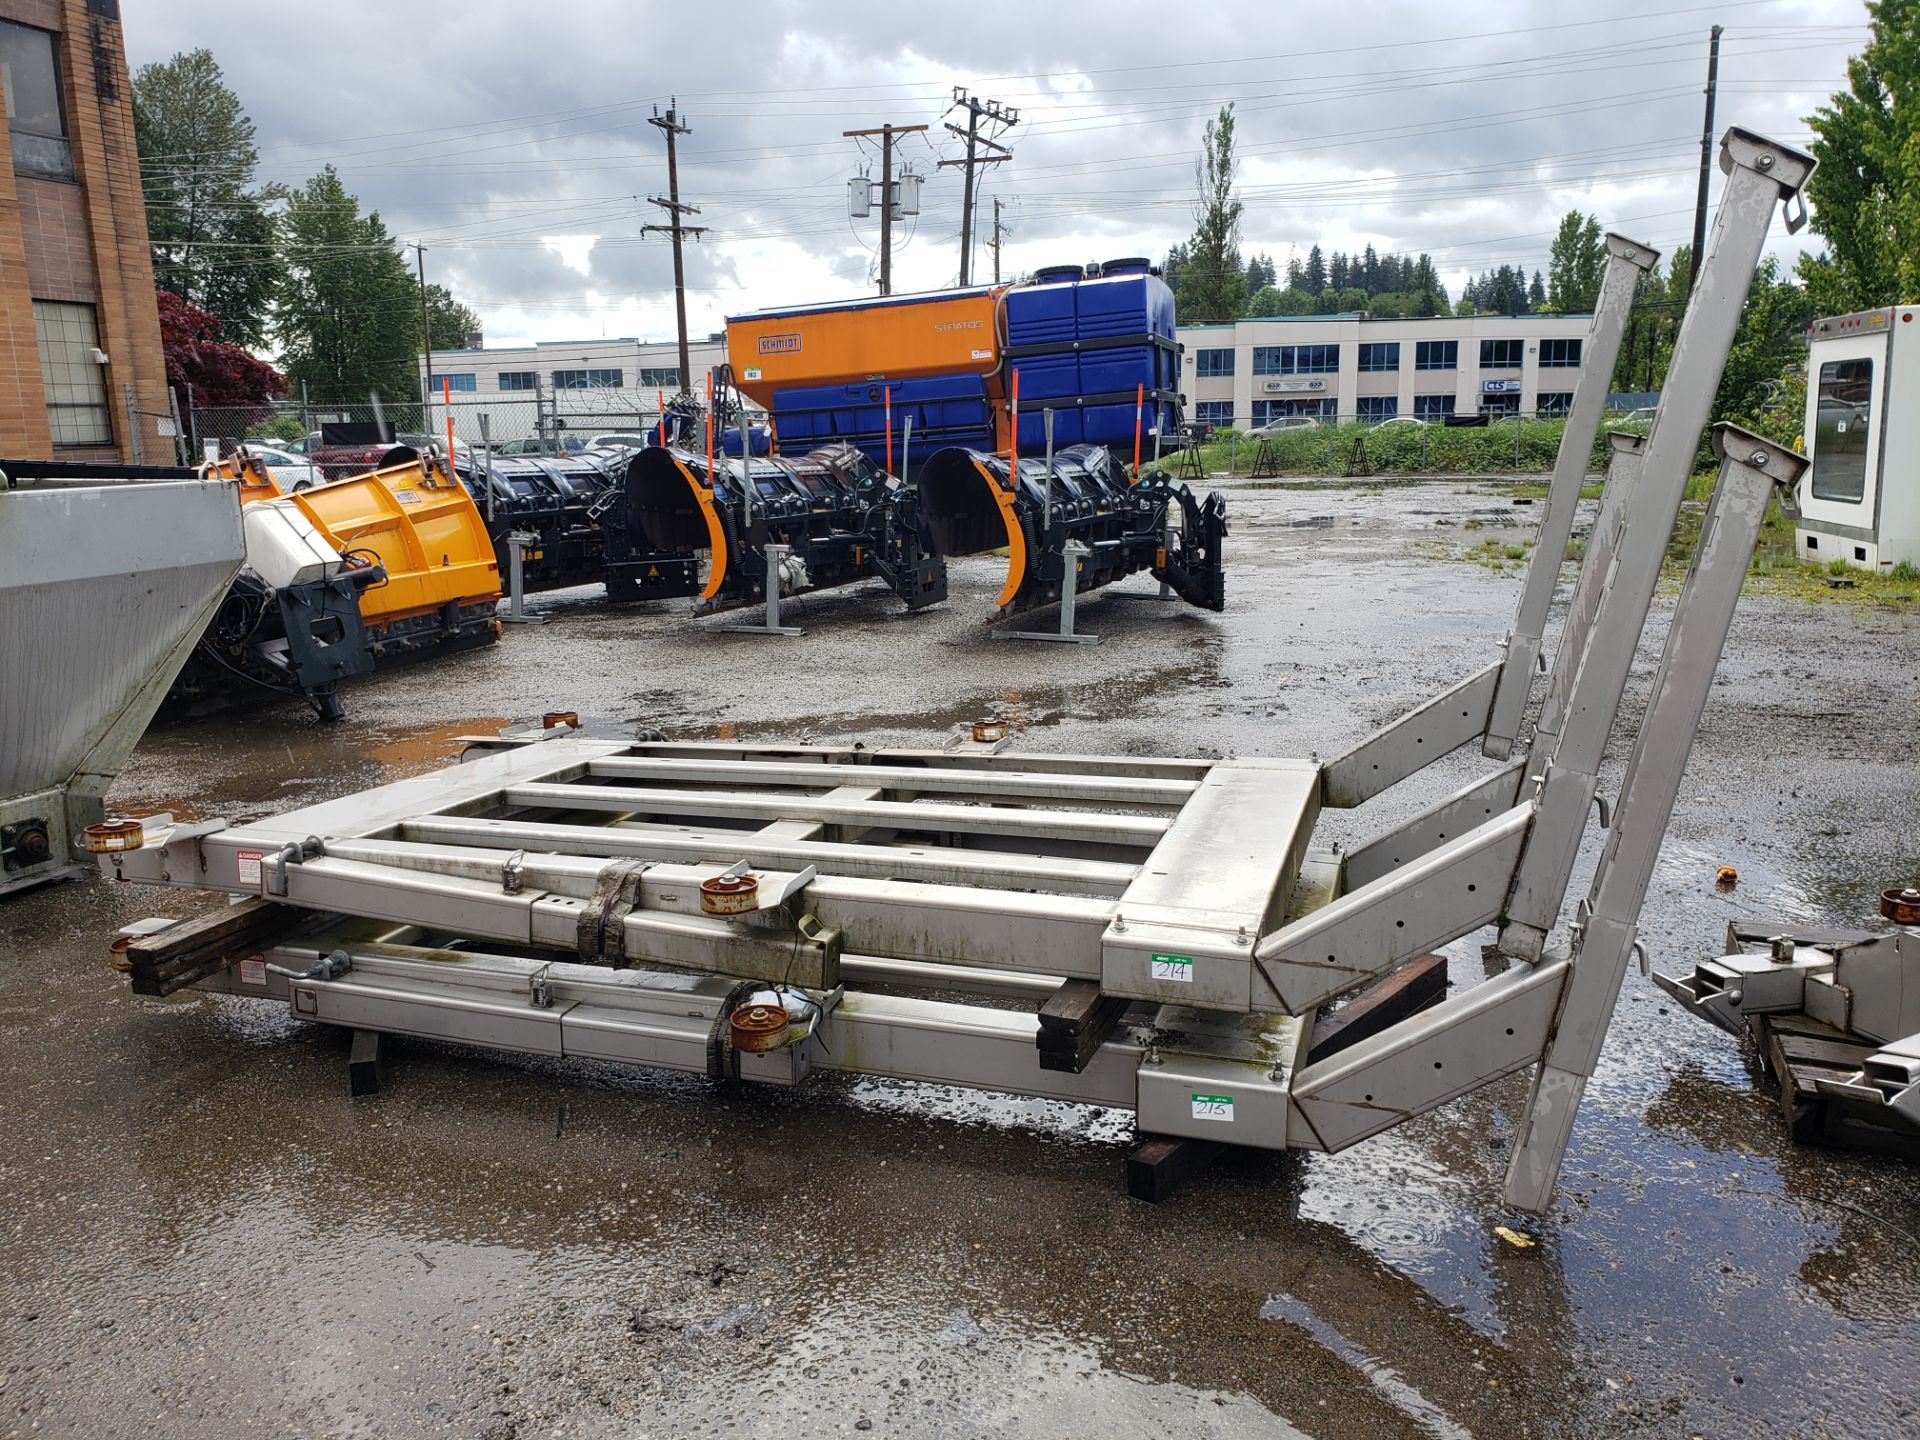 SS LEG STAND/EASY LOAD FOR 10' SPREADER